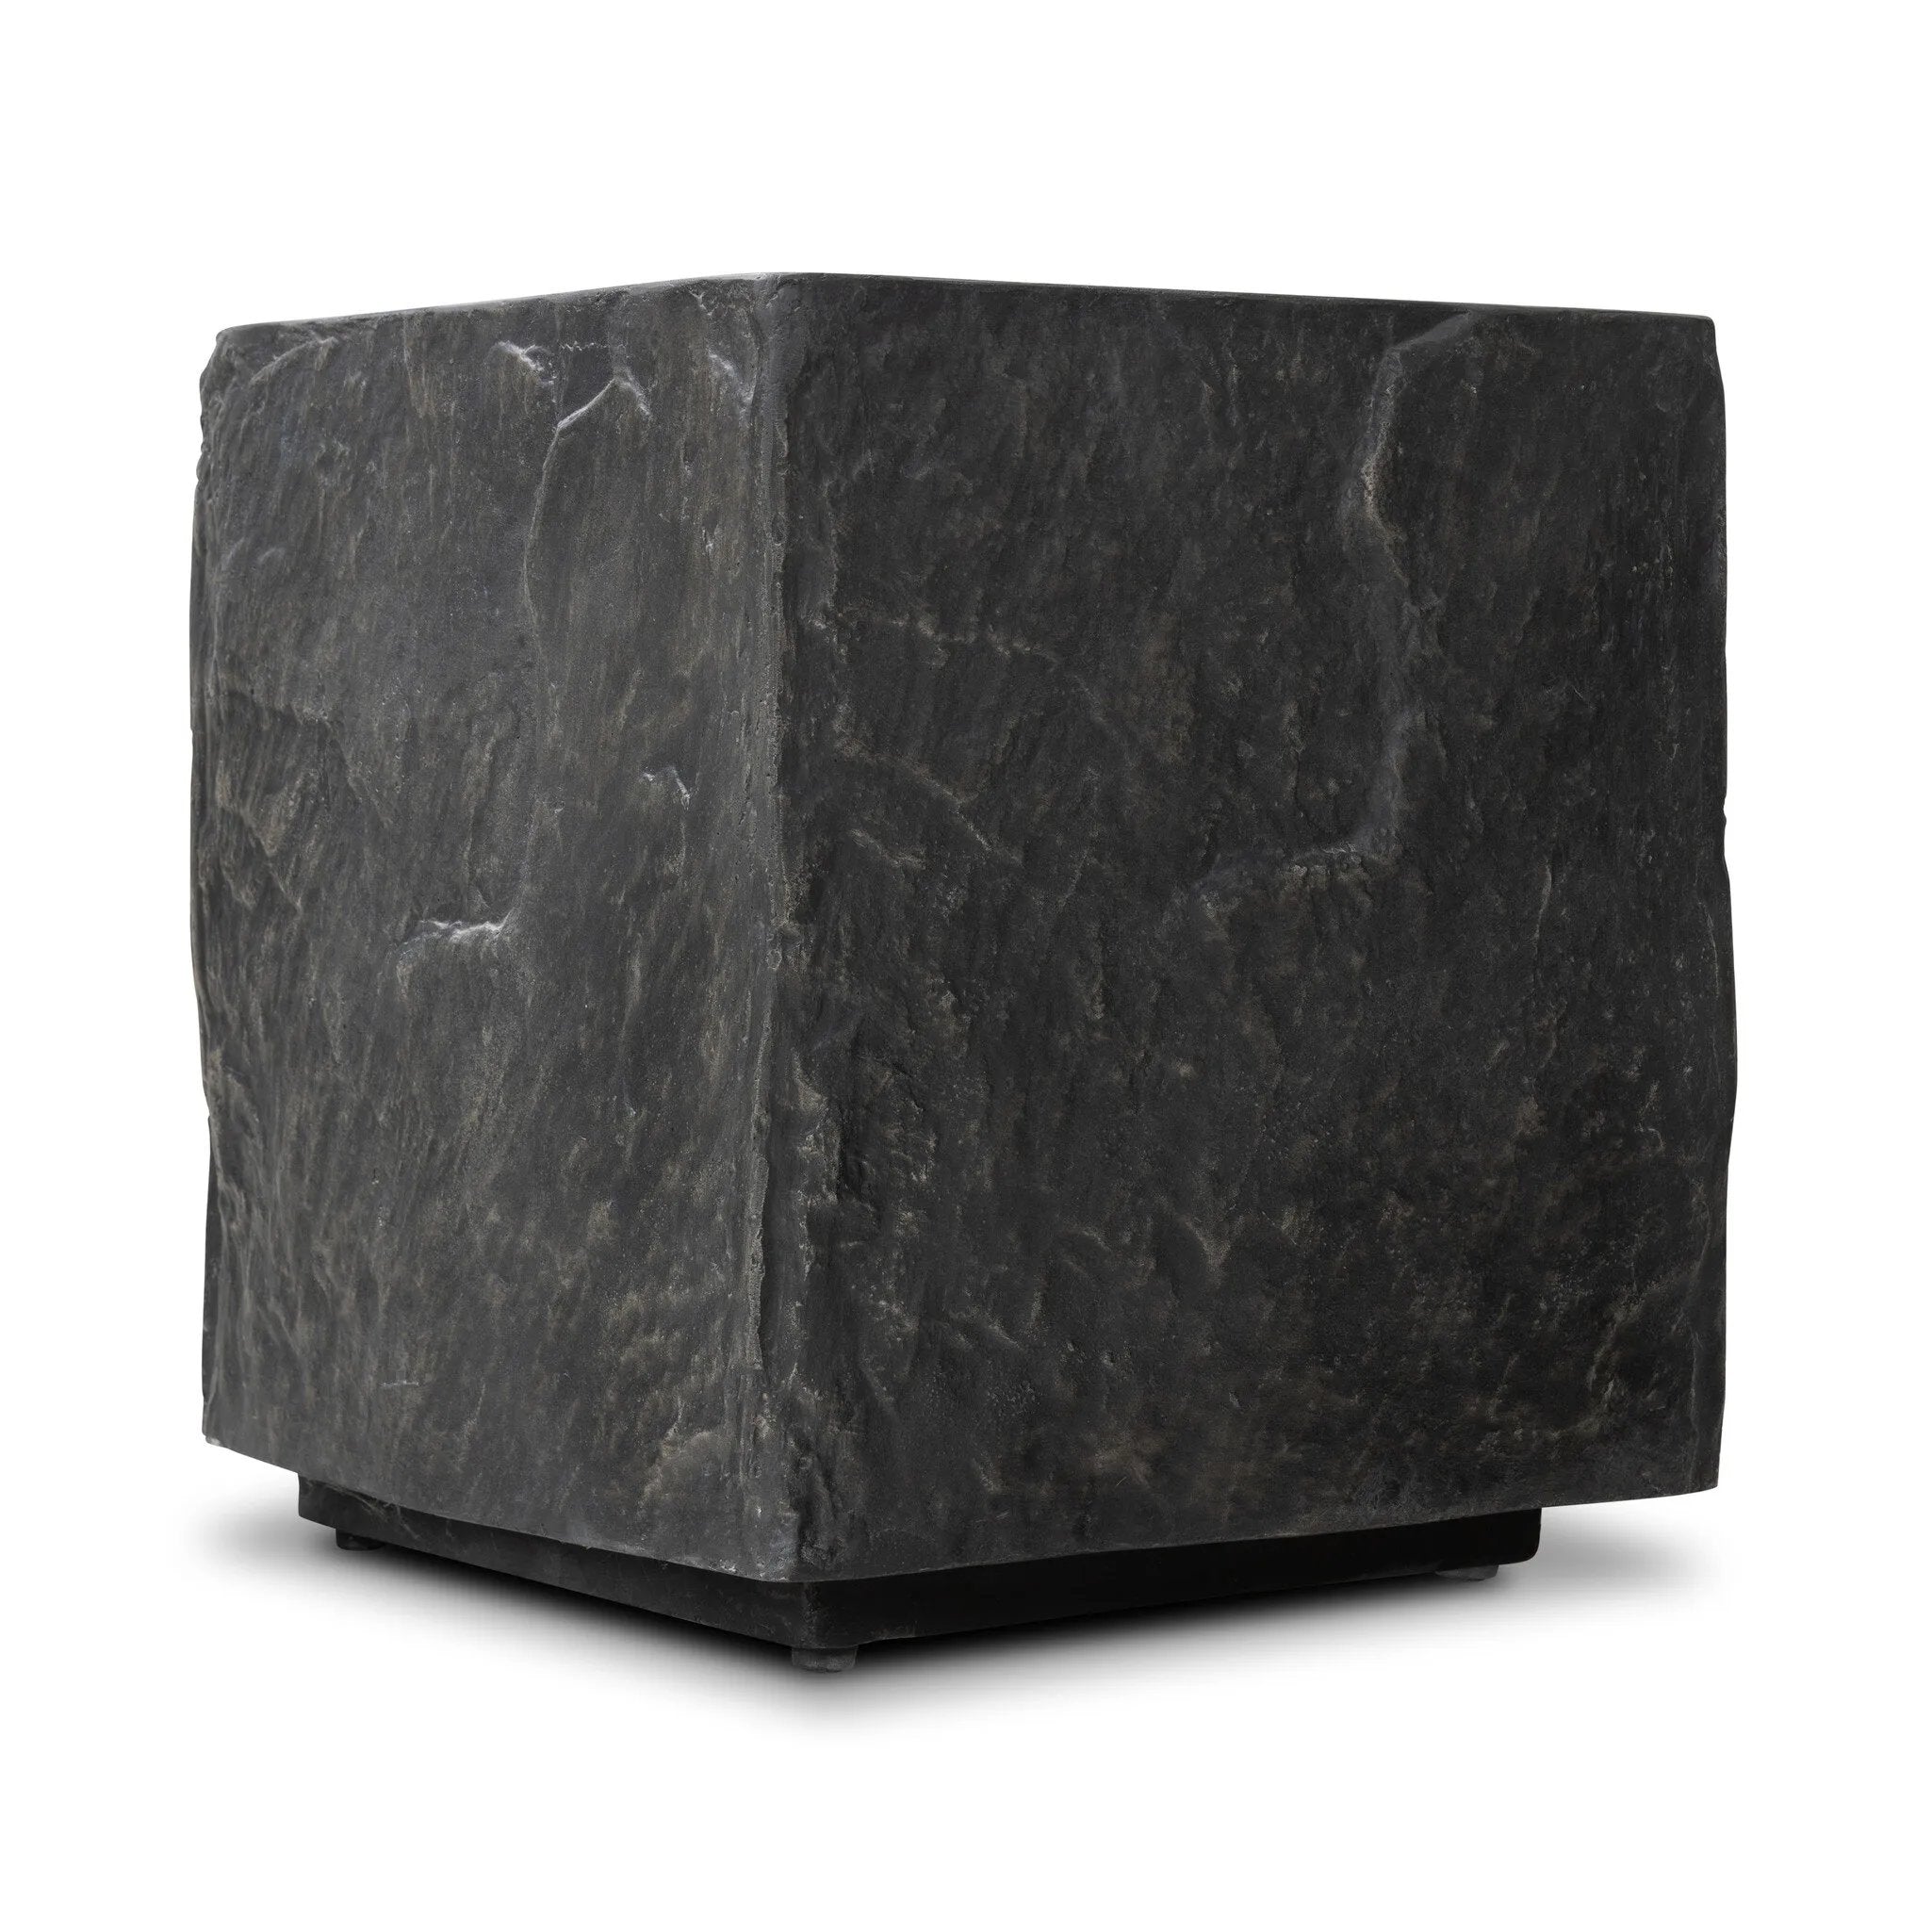 Cast black concrete features heavily textured sides that resemble natural slate, paired with a smoothed tabletop.Collection: Chandle Amethyst Home provides interior design, new home construction design consulting, vintage area rugs, and lighting in the Laguna Beach metro area.